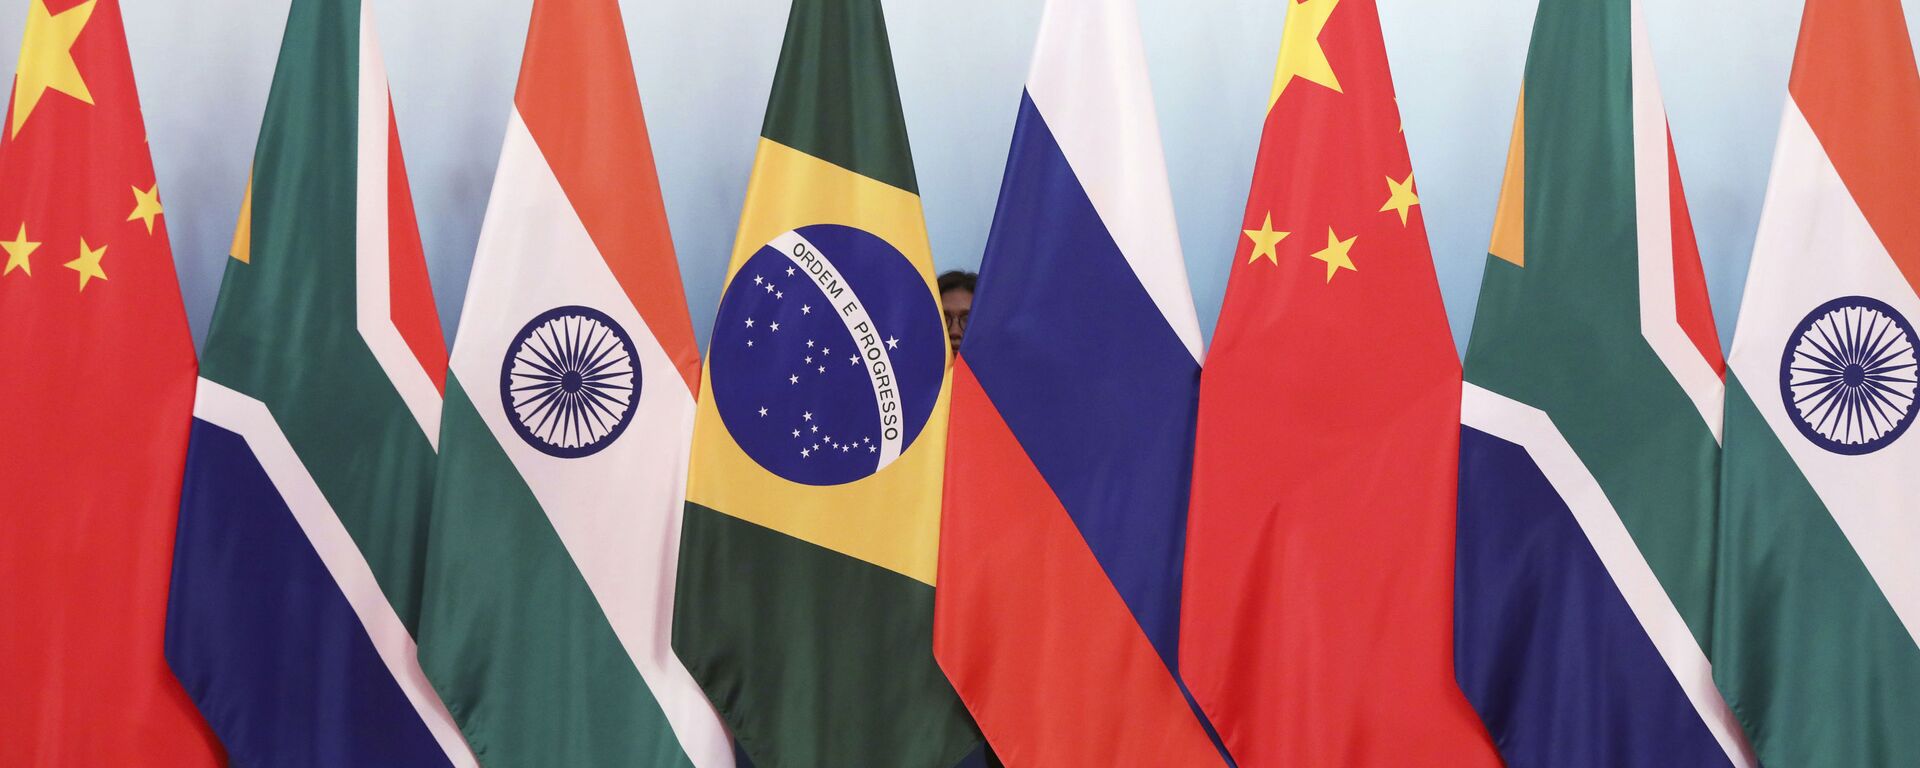 Staff worker stands behinds national flags of Brazil, Russia, China, South Africa and India to tidy the flags ahead of a group photo during the BRICS Summit at the Xiamen International Conference and Exhibition Center in Xiamen, southeastern China's Fujian Province, Monday, Sept. 4, 2017. - Sputnik International, 1920, 20.05.2022